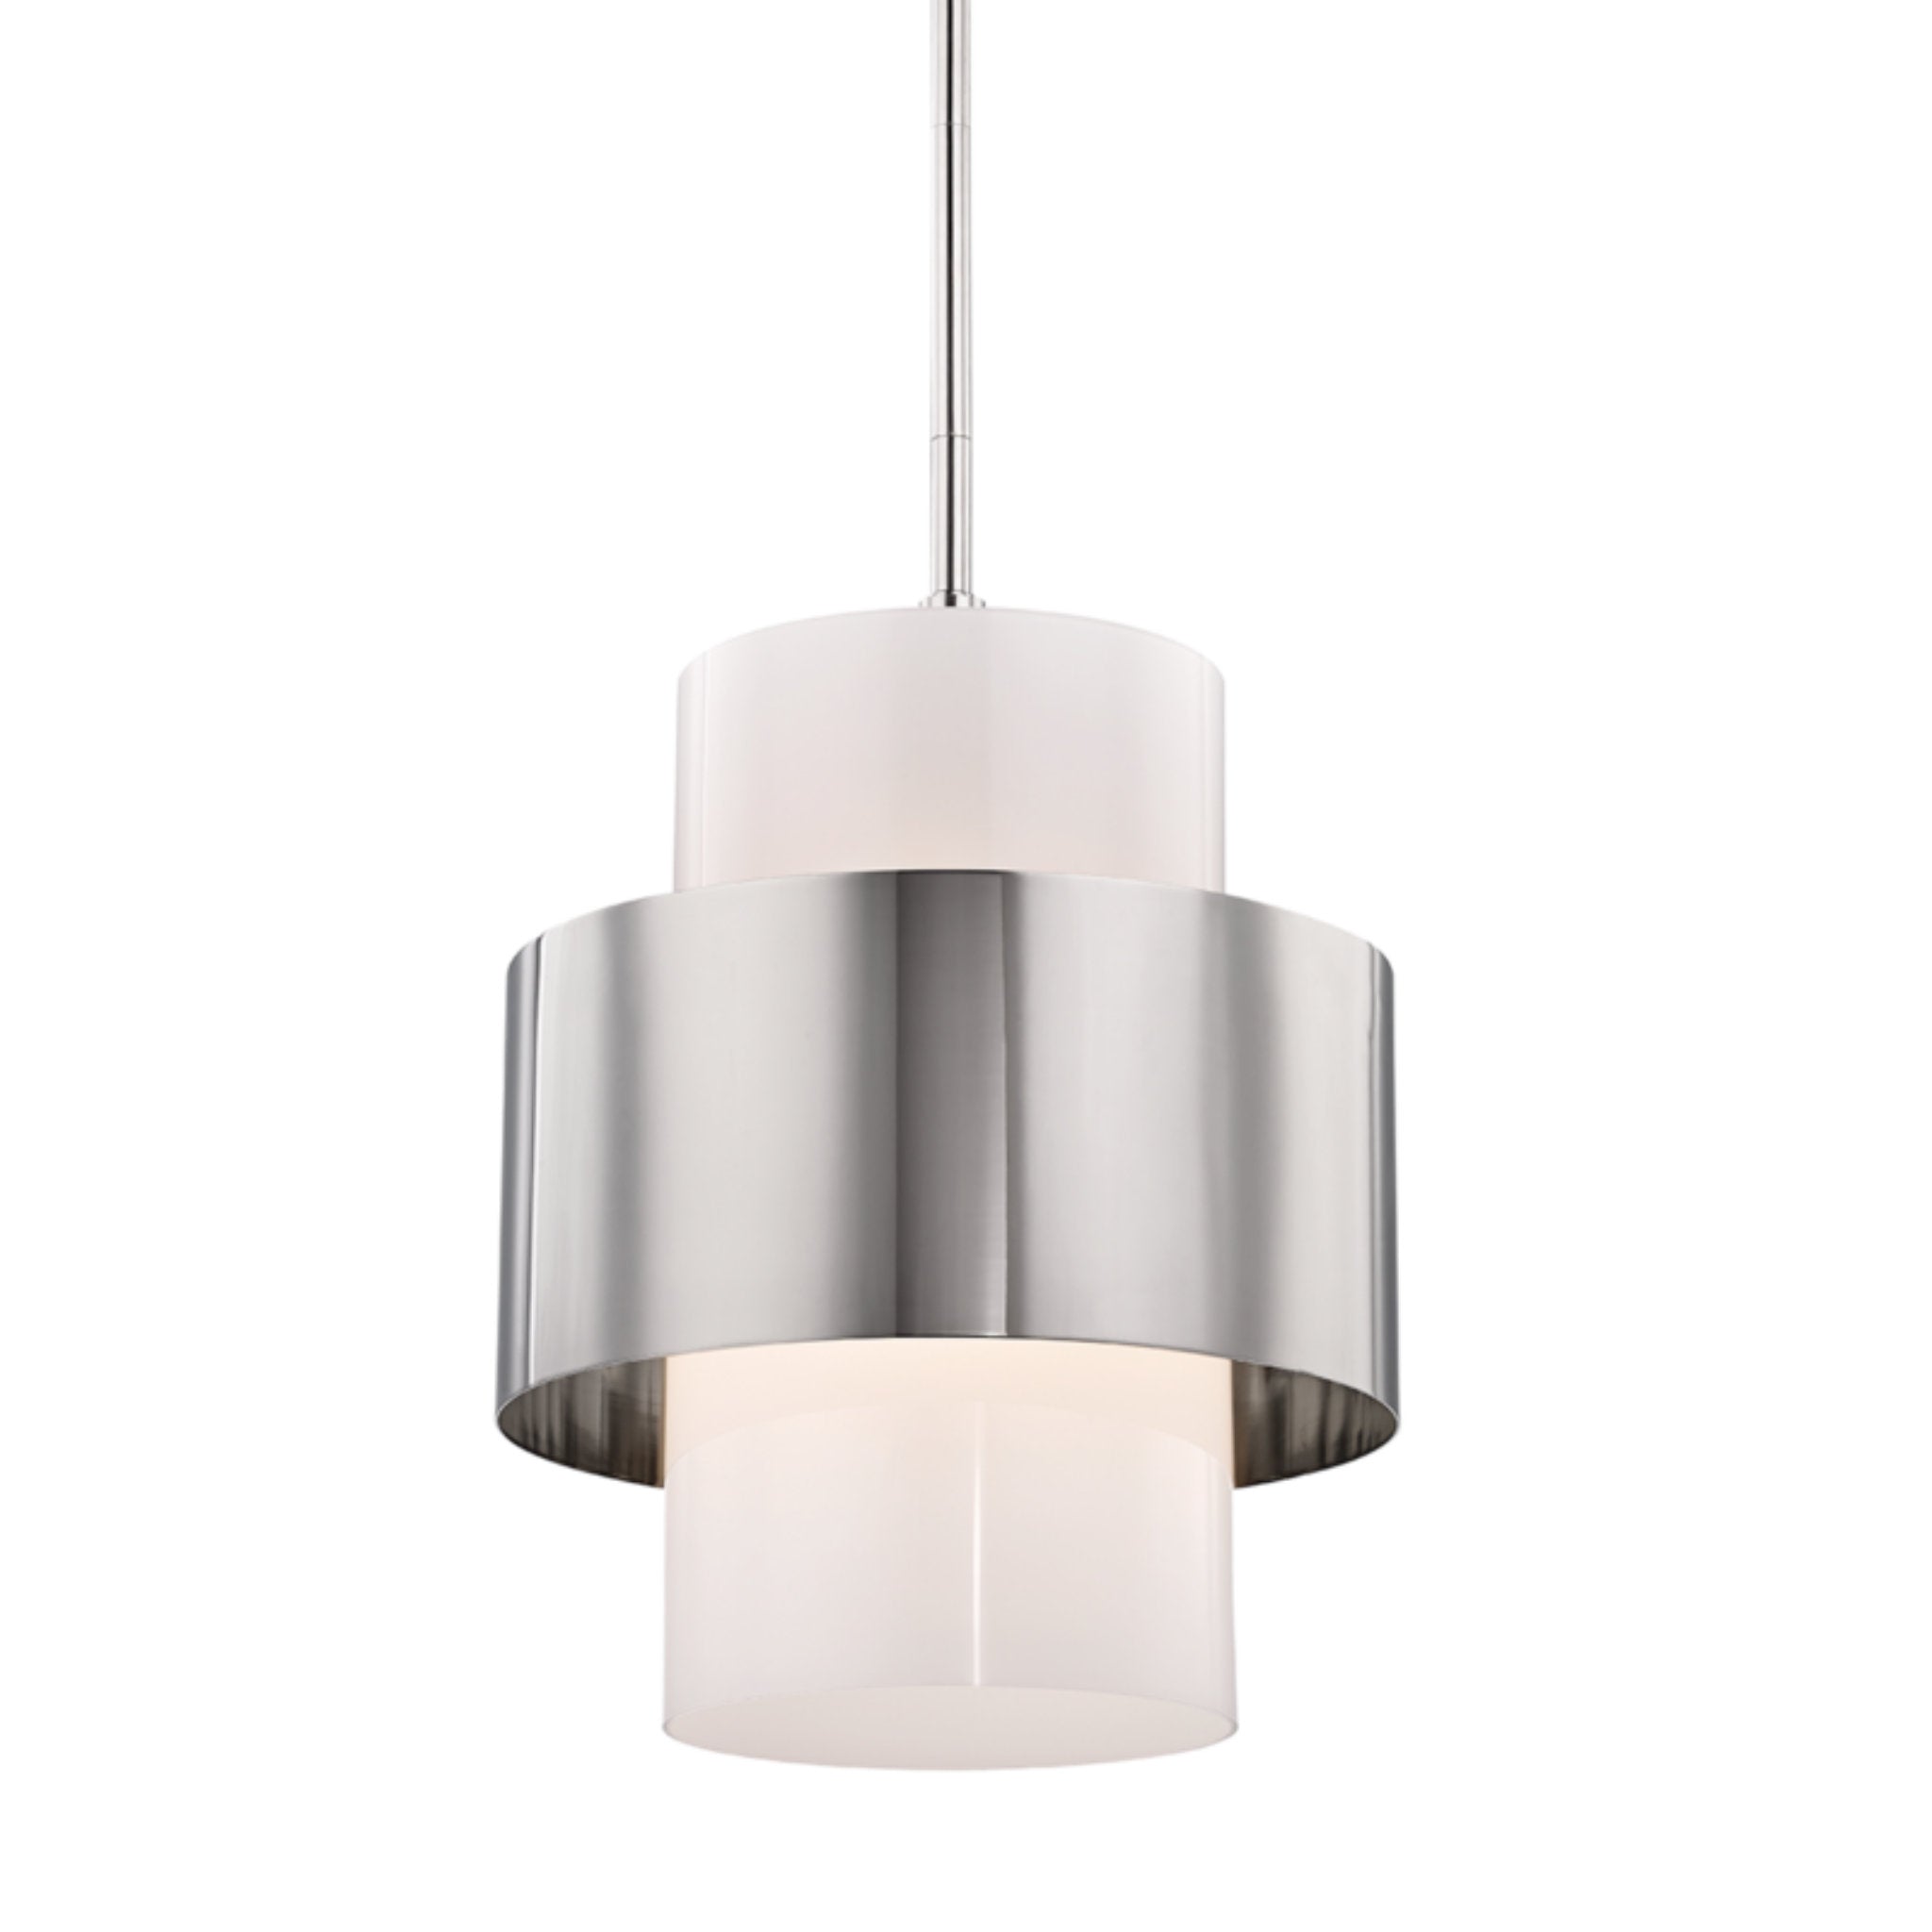 Corinth 1 Light Pendant in Polished Nickel